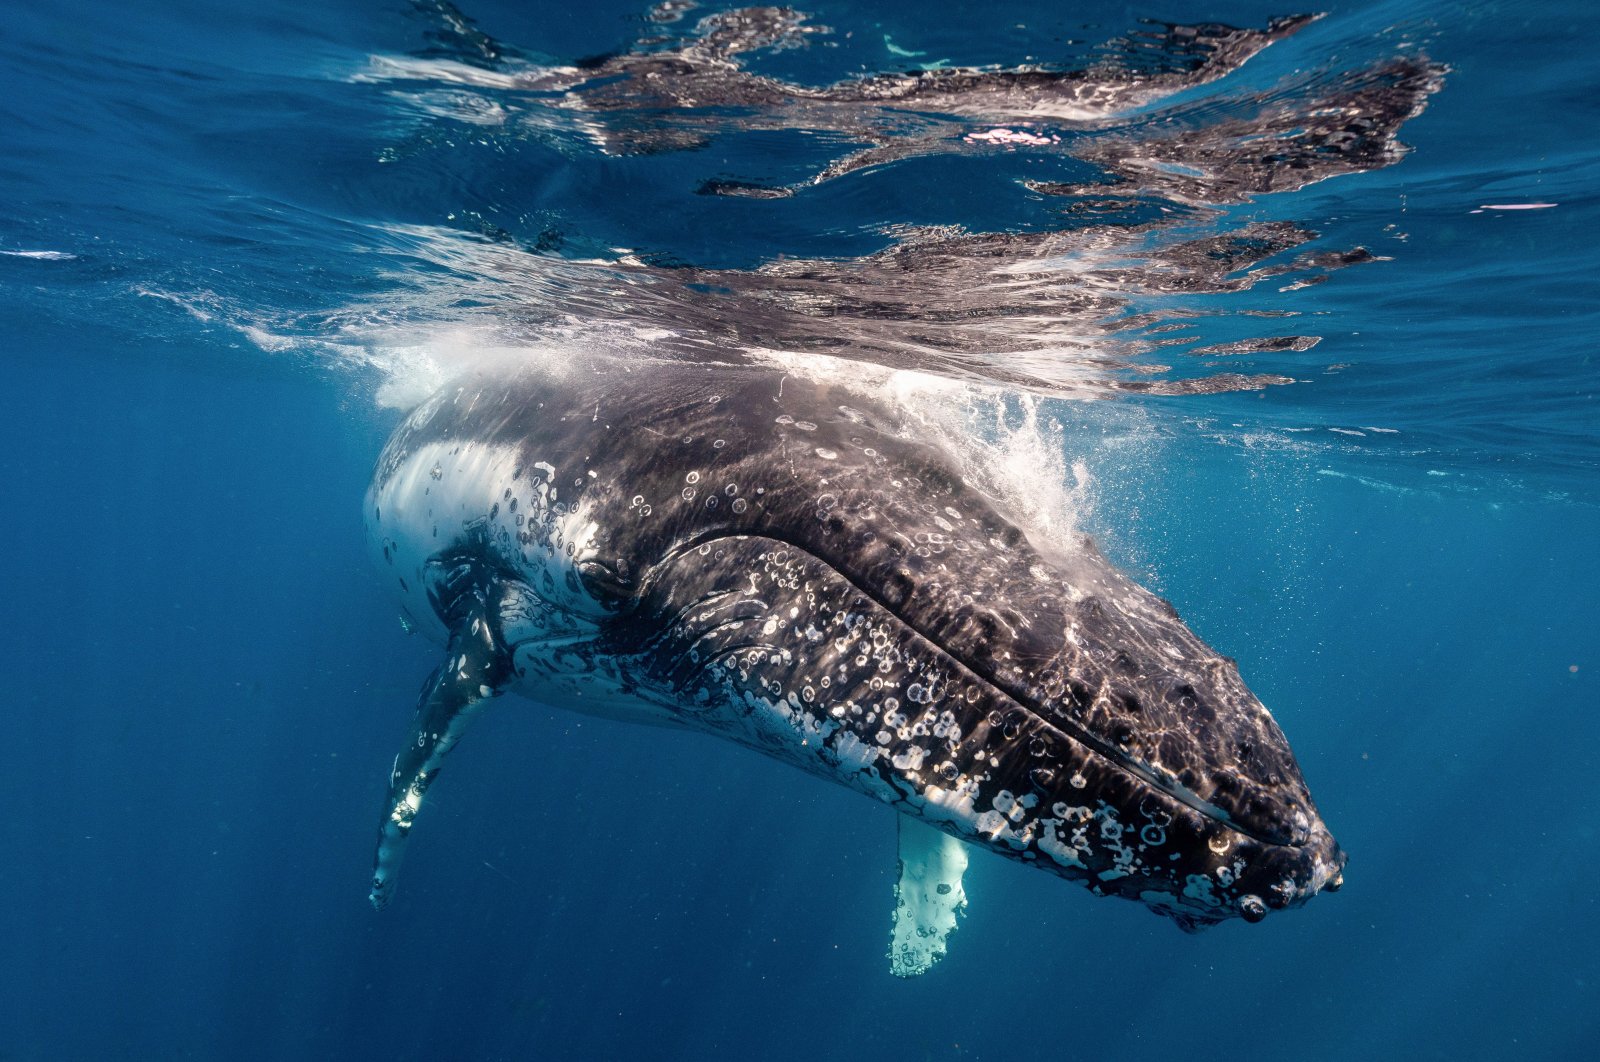 At certain times of the year, humpback whales can also be seen in Jervis Bay, which is about 200 kilometres from Sydney, Australia, Aug. 28, 2019. (dpa Photo)